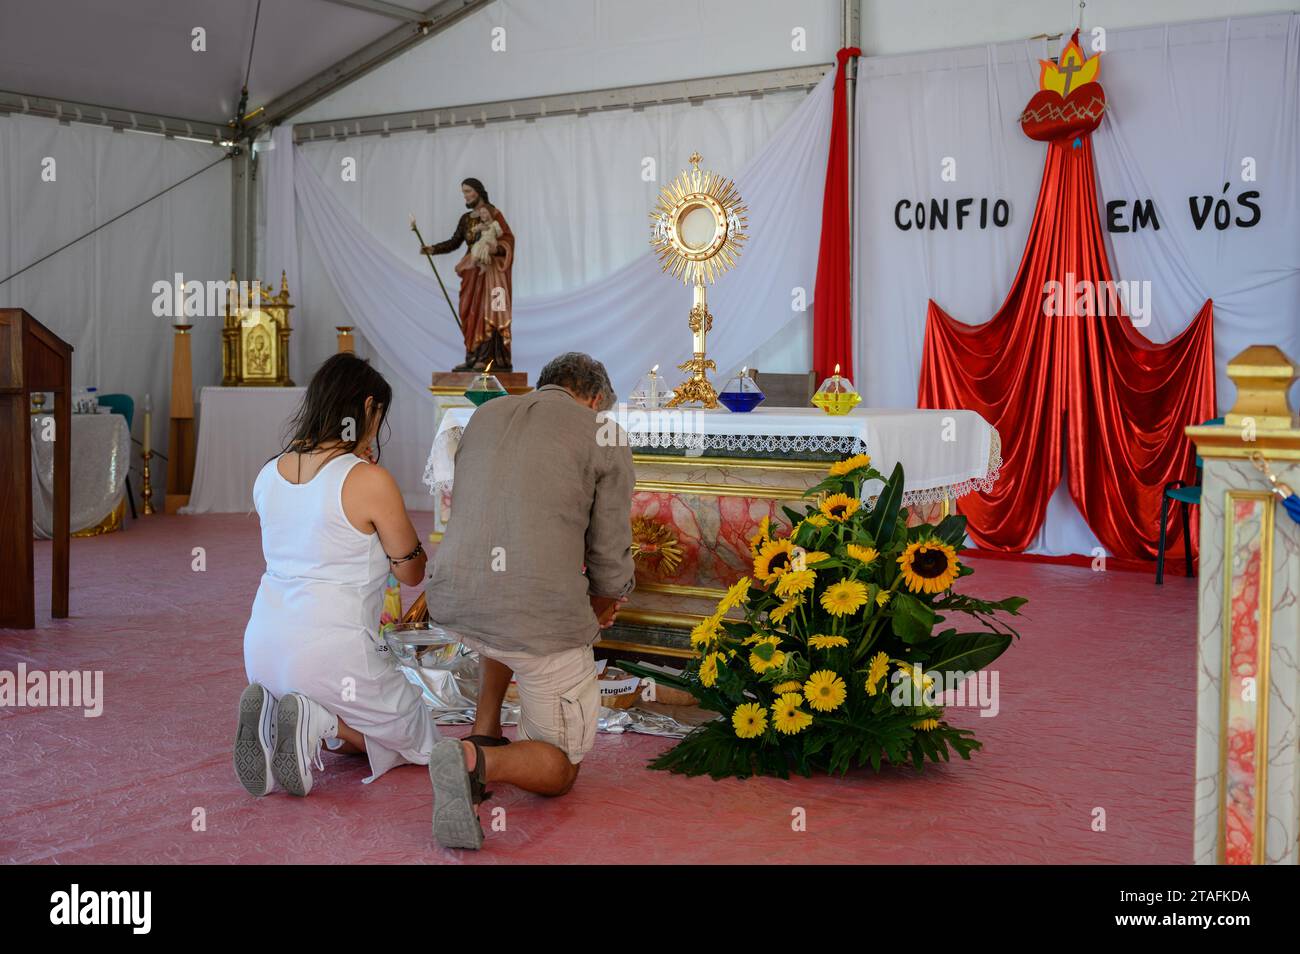 A middle-aged couple kneeling in adoration of the Blessed Sacrament. A tent at the Sanctuary of Christ the King in Lisbon, Portugal during WYD 2023. Stock Photo